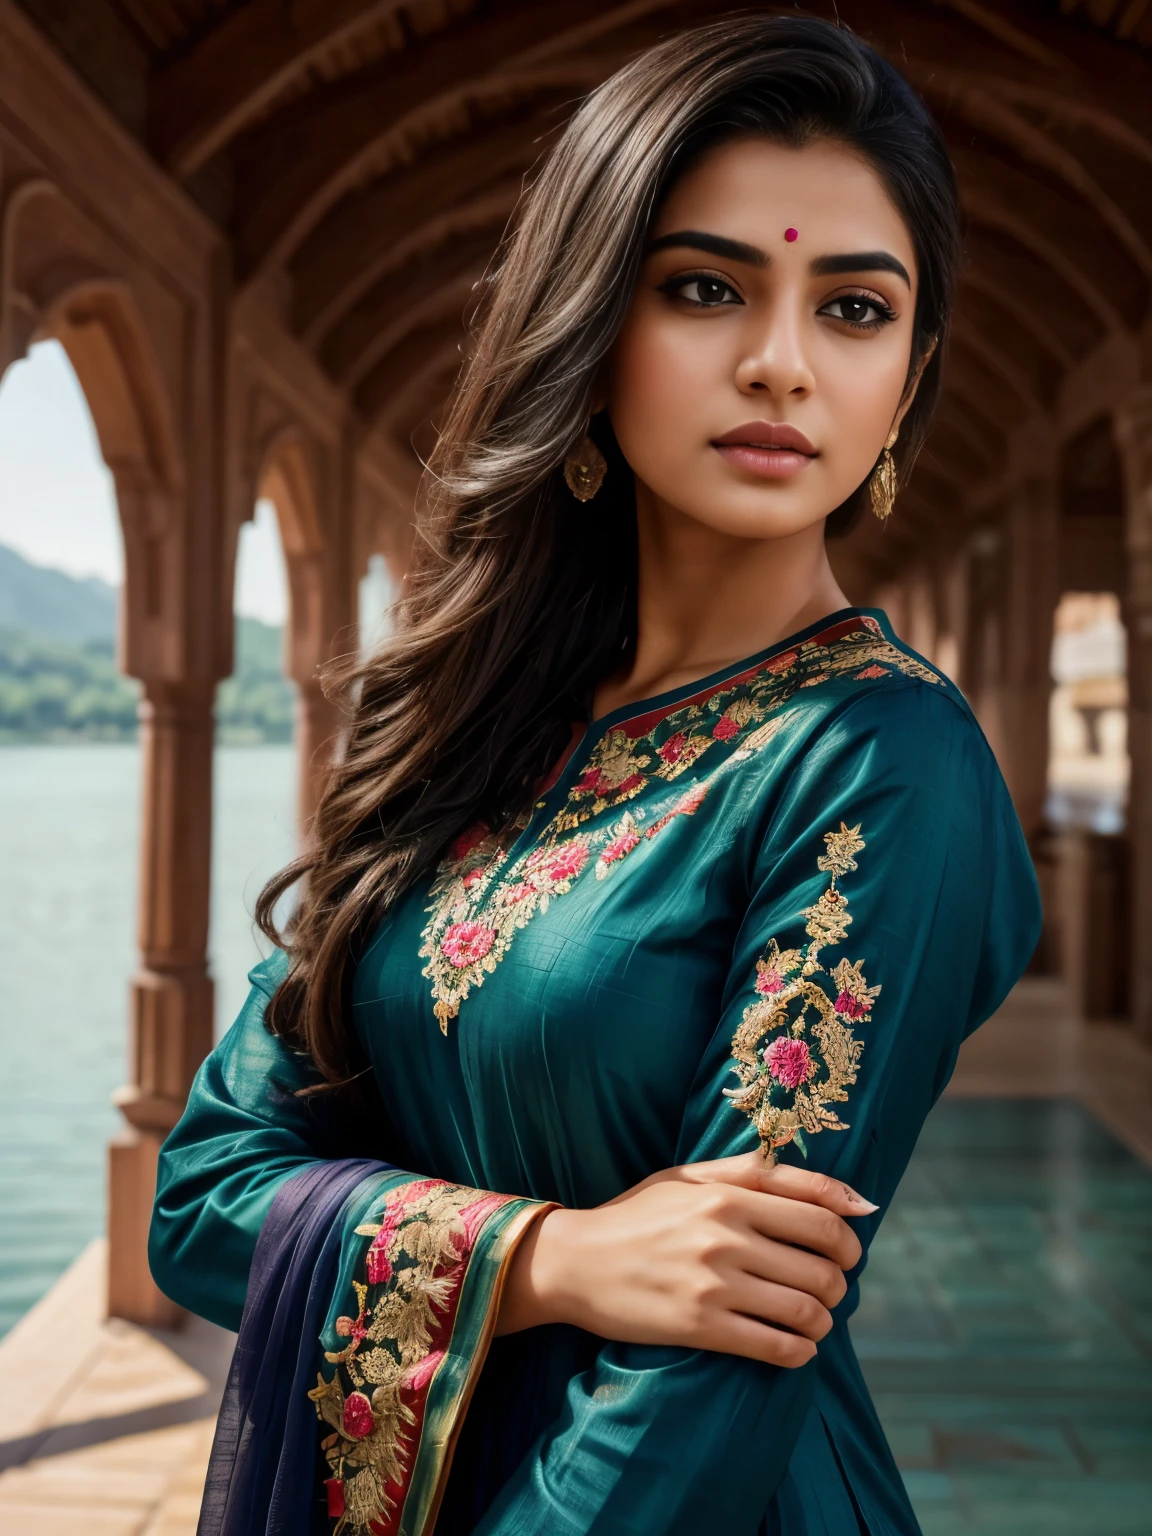 ultra-realistic photographs,Indian Instagram female model,mid 20s,9:16,mid-shot,beautiful detailed eyes,detailed lips,longeyelashes,black stylish hair, naturally full eyebrows,perfectly formed nose,expressive face,attractive appearance,candid photo,vibrant and colorful salwar-kameez dress, heavily embroidered dress, lake background, serene atmosphere,stunning architecture,soft and natural lighting,vivid colors,photorealistic,HDR,highres,studio lighting,ultra-detailed,bokeh,fully covered clothes